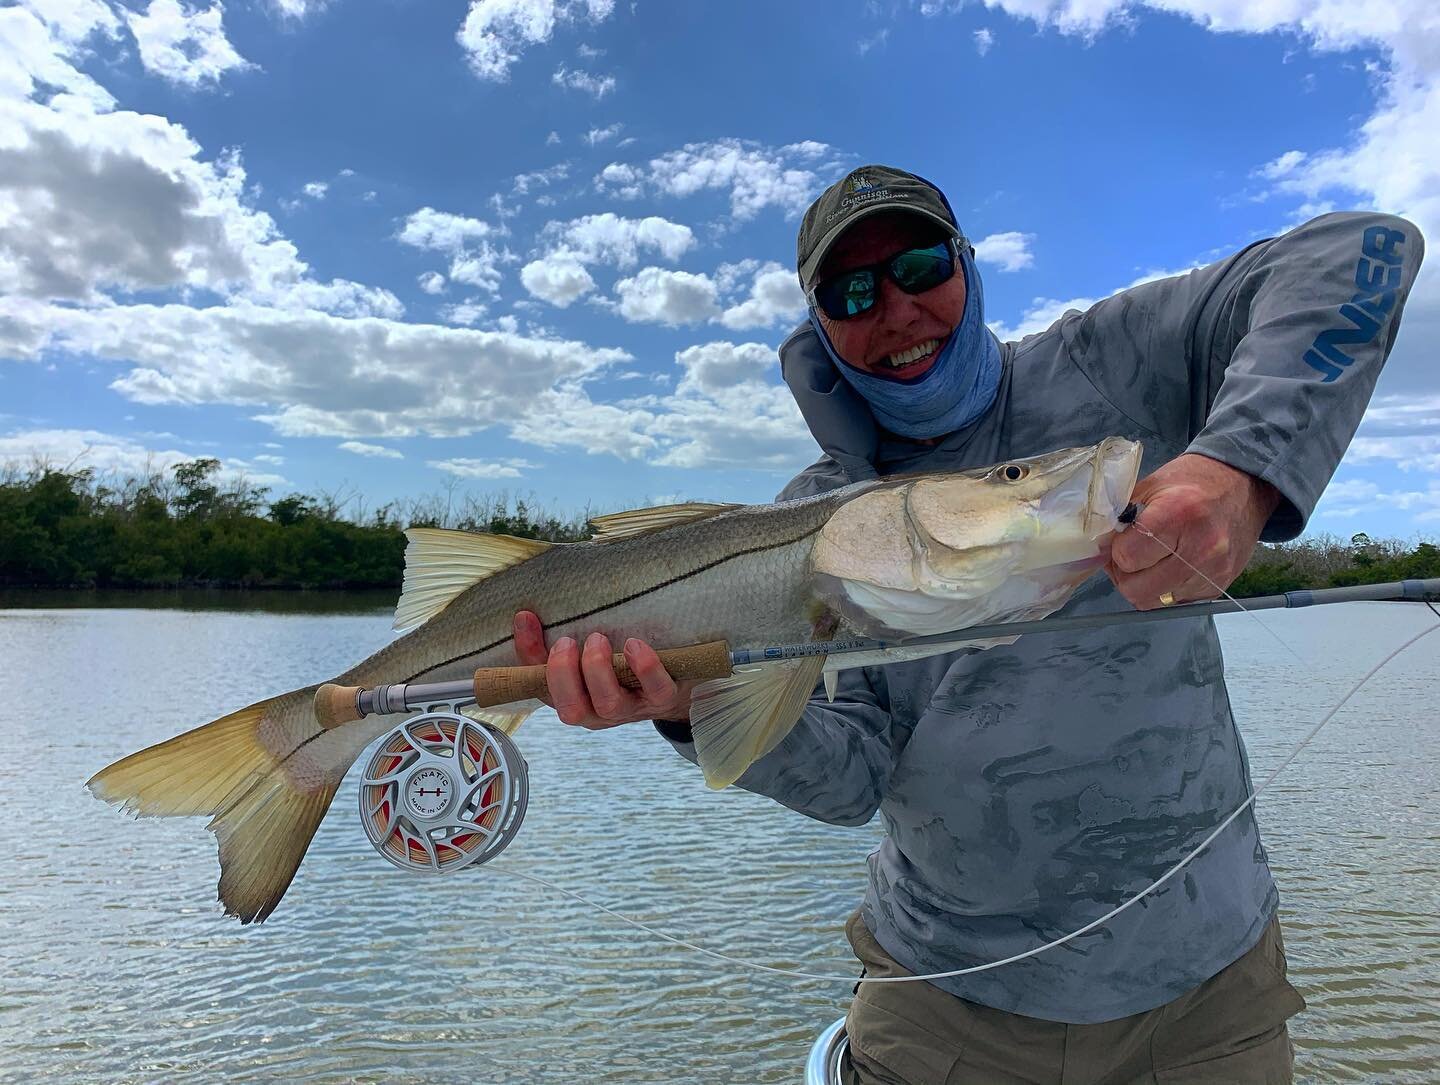 Great half-day with David this afternoon. Not too bad for his first and second Snook ever! #flyfishing#snookonfly#marcoisland#naples#southwestflorida#hellsbayboatworks#hatchoutdoors#waterworkslamson#mangroveoutfitters